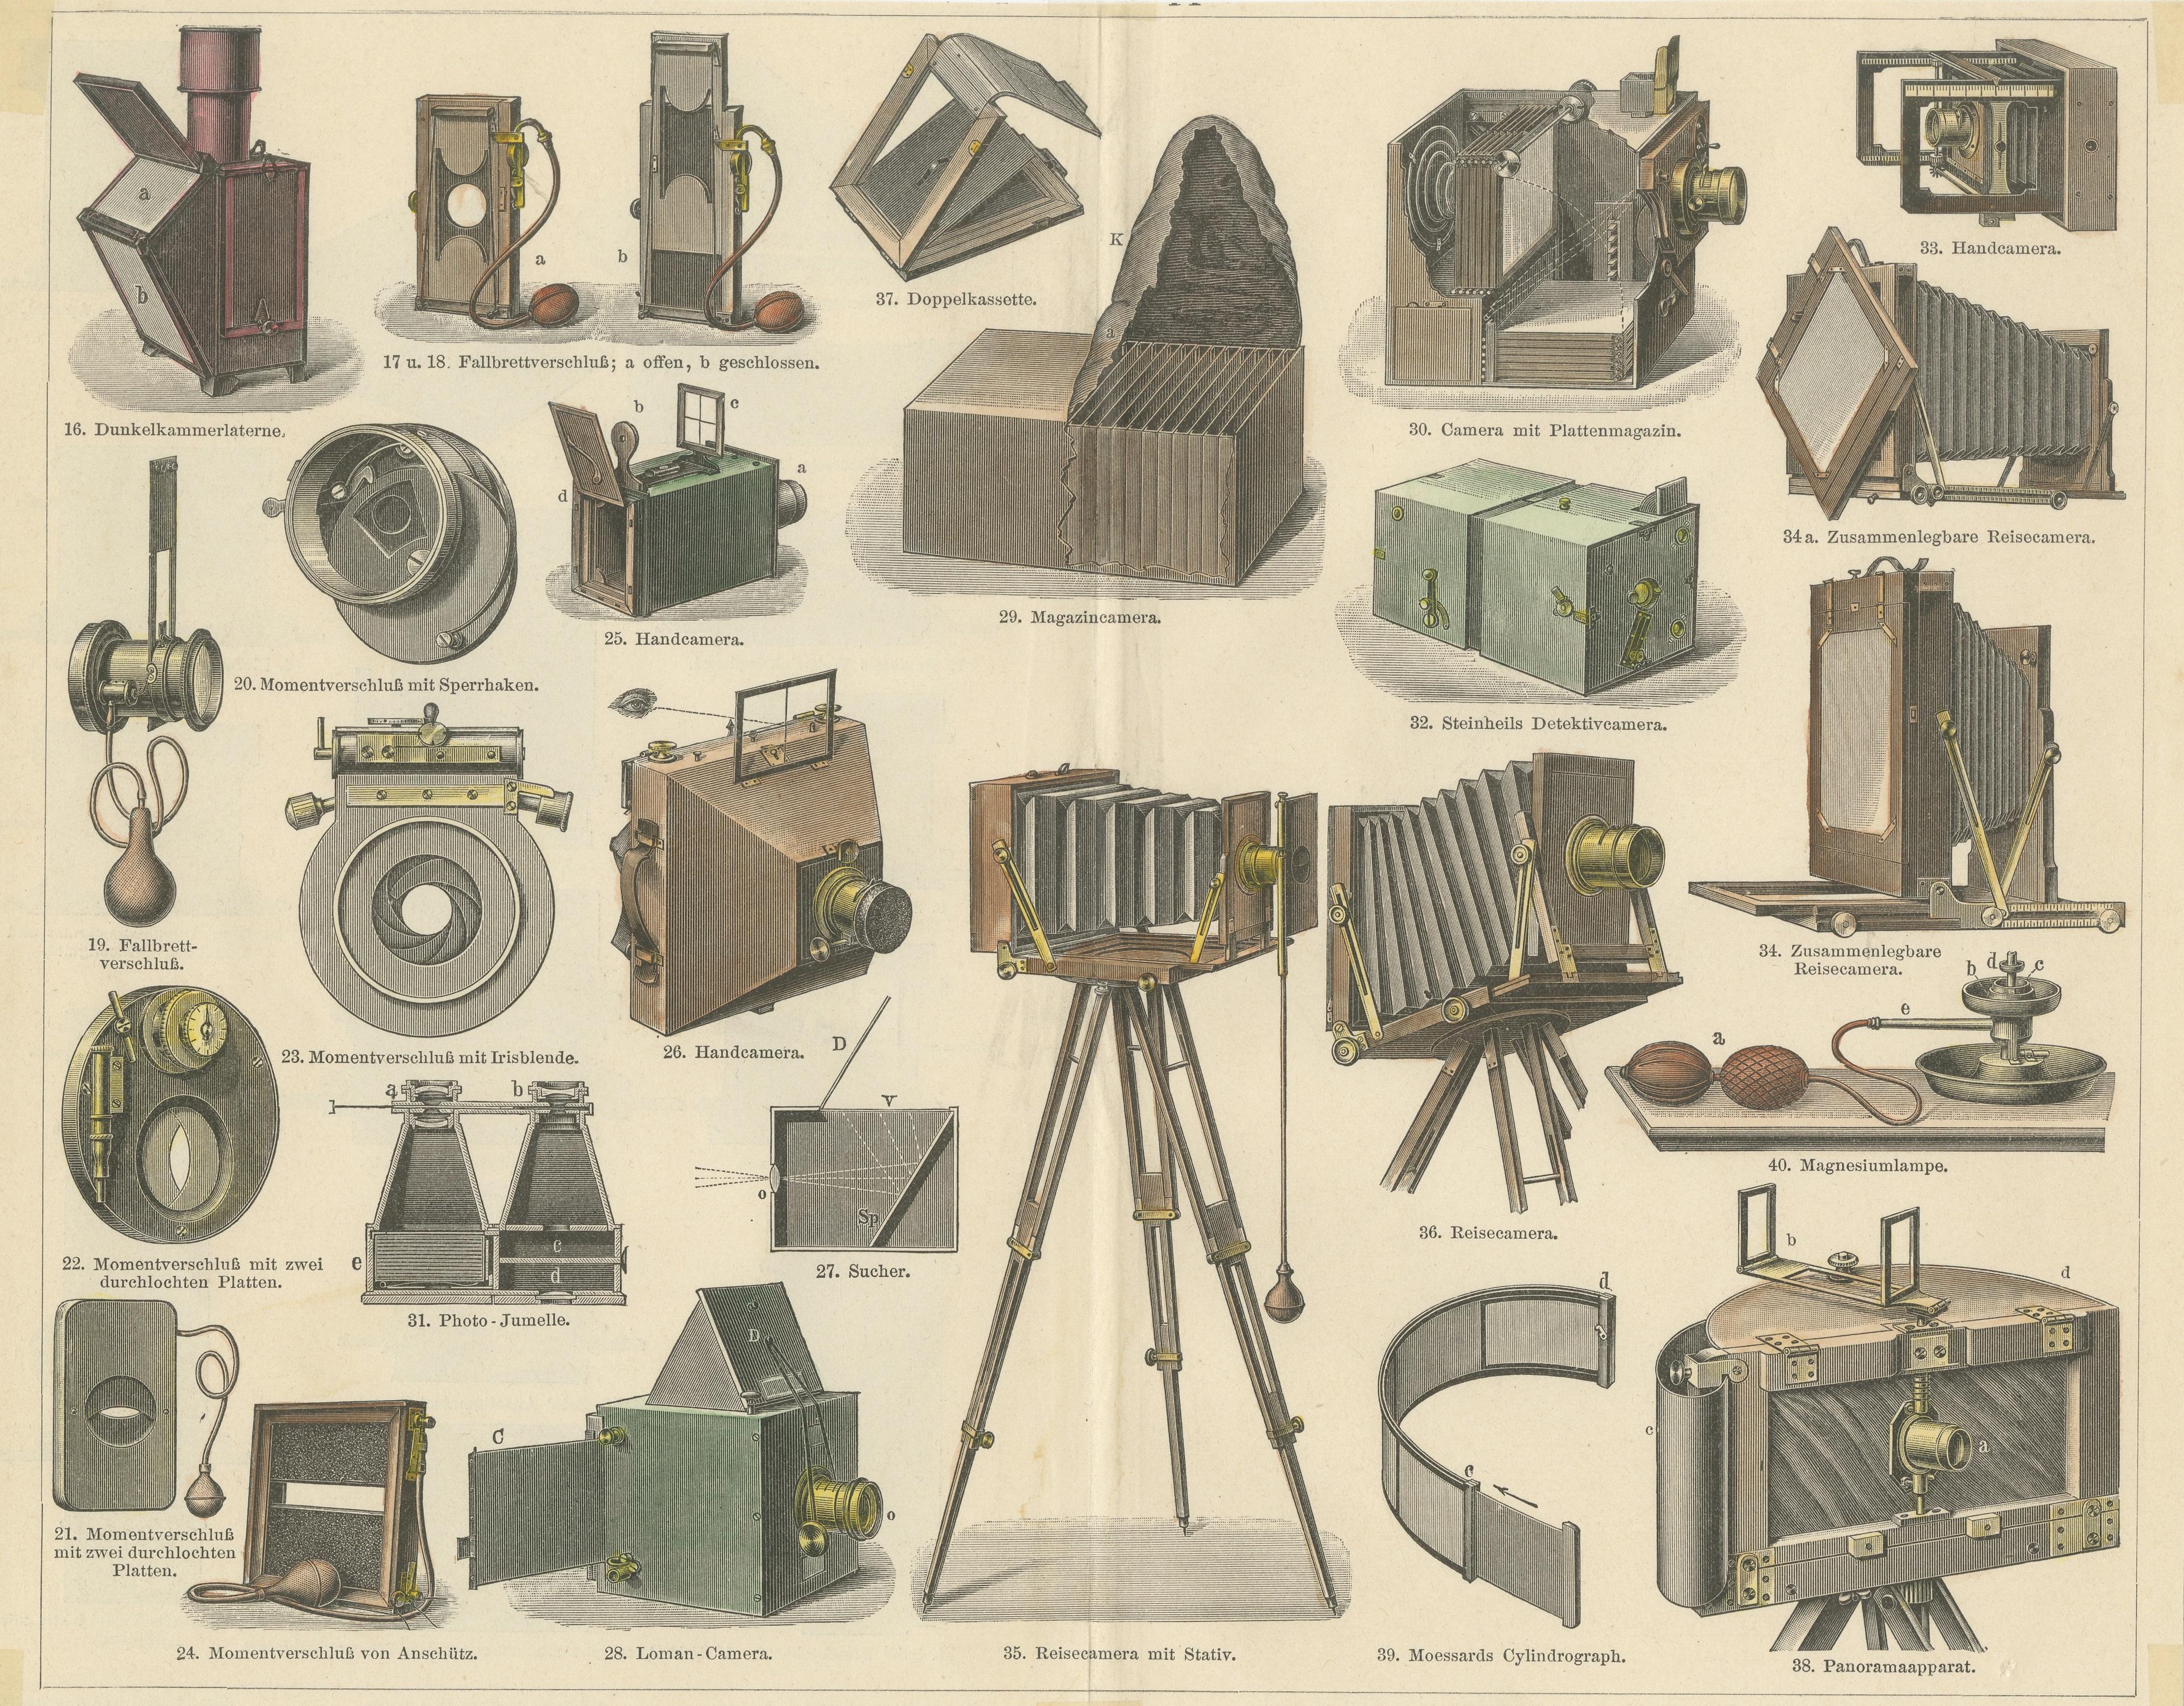 This is an original antique print titled 'Photographische Apparate II'. It shows various photo equipment and cameras. This print originates from Volume 5 of Meyers Konversations-Lexikon, published between 1893 and 1897. 

Meyers